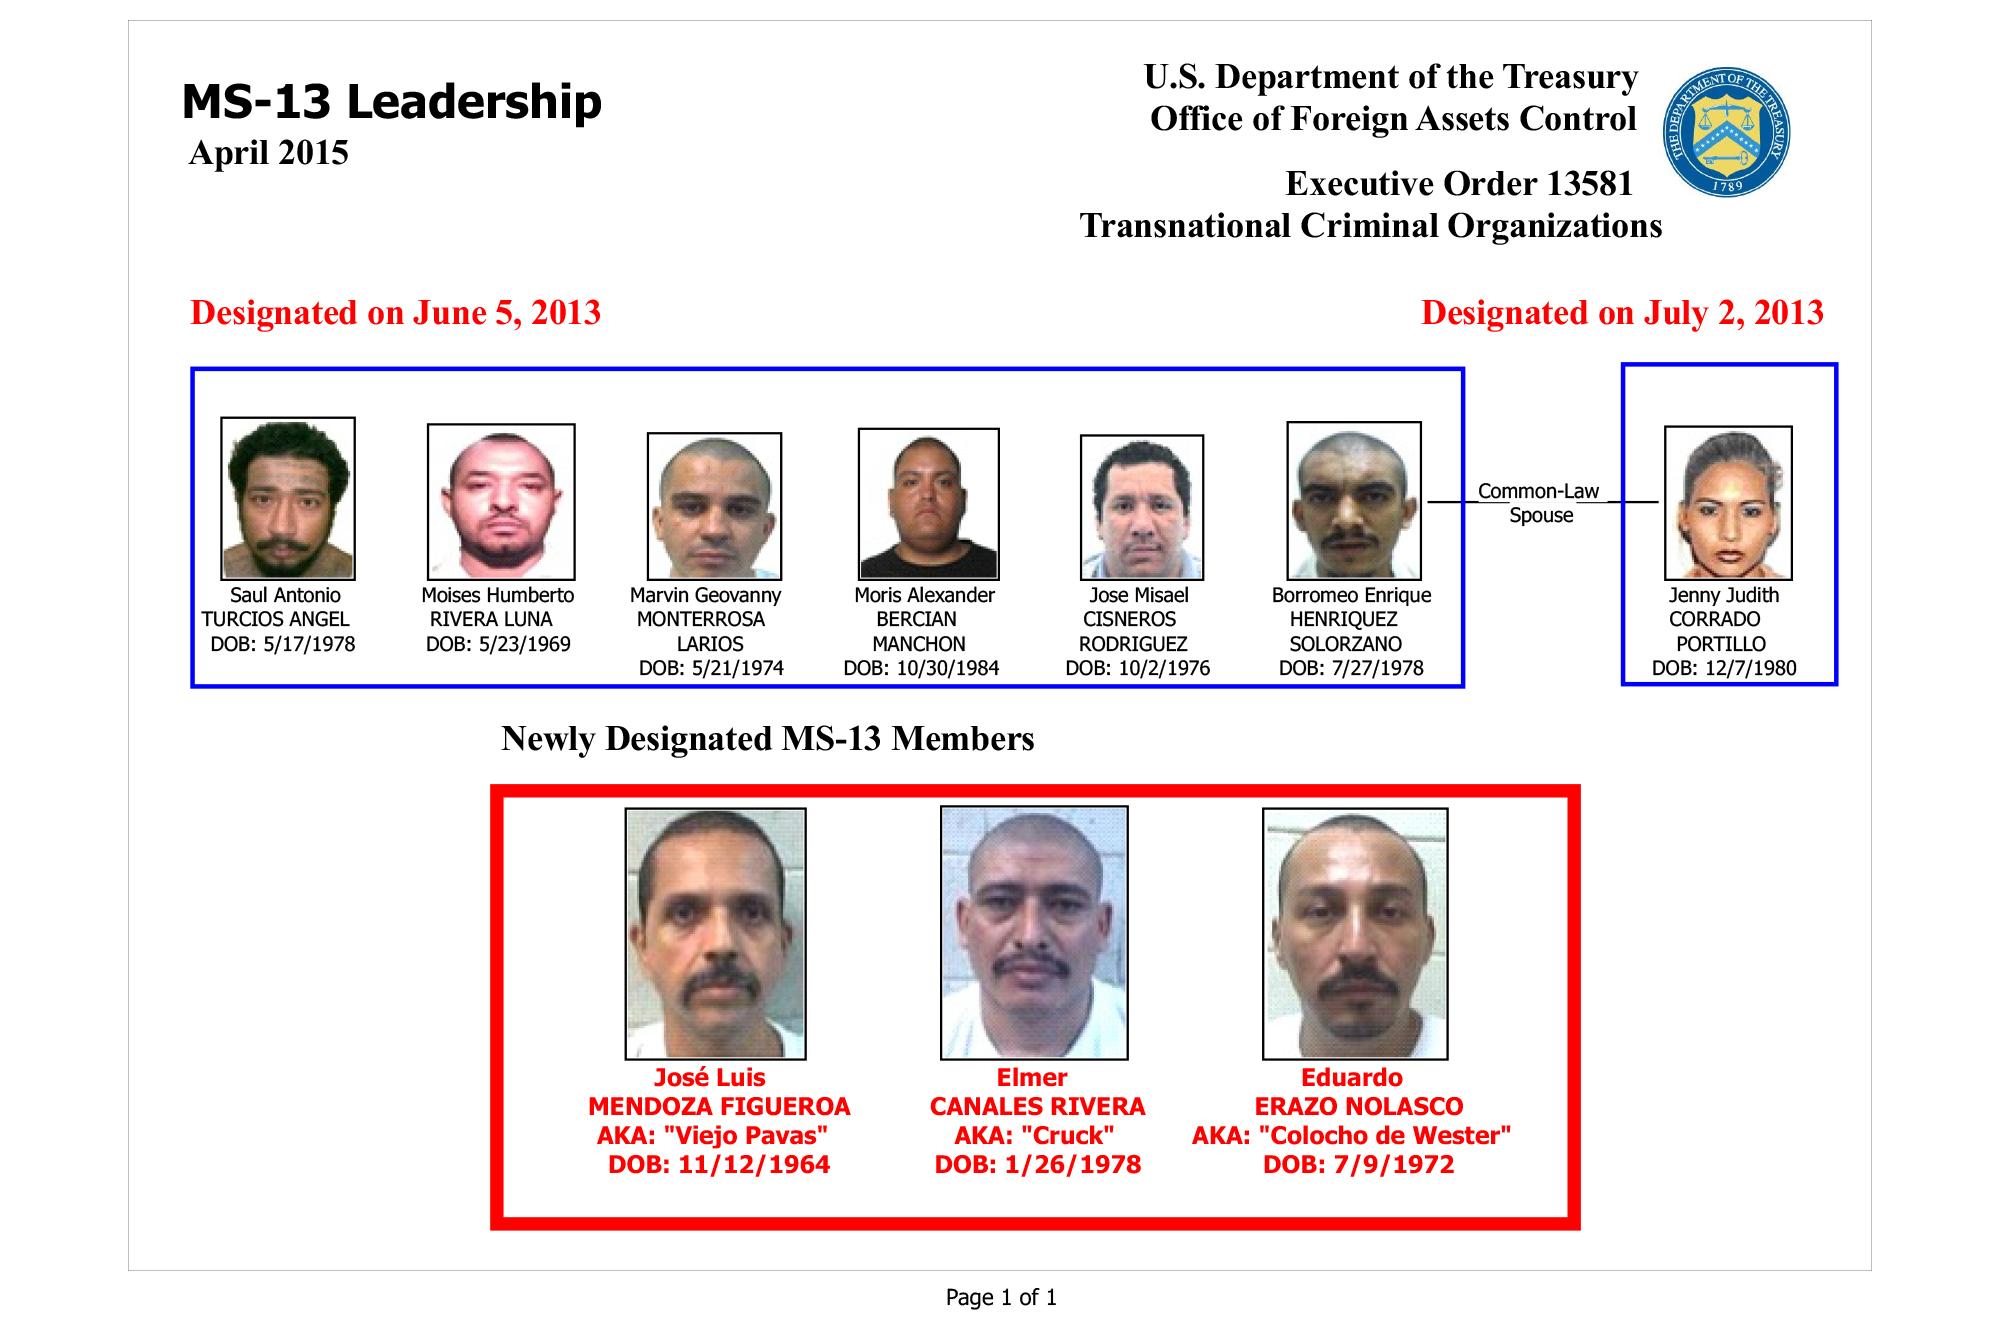 In April 2015, the U.S. Treasury Department designated Helmer Rivera Canales as a leader of MS-13, a gang that three years earlier it classified as transnational criminal organization. Photo: Treasury Department